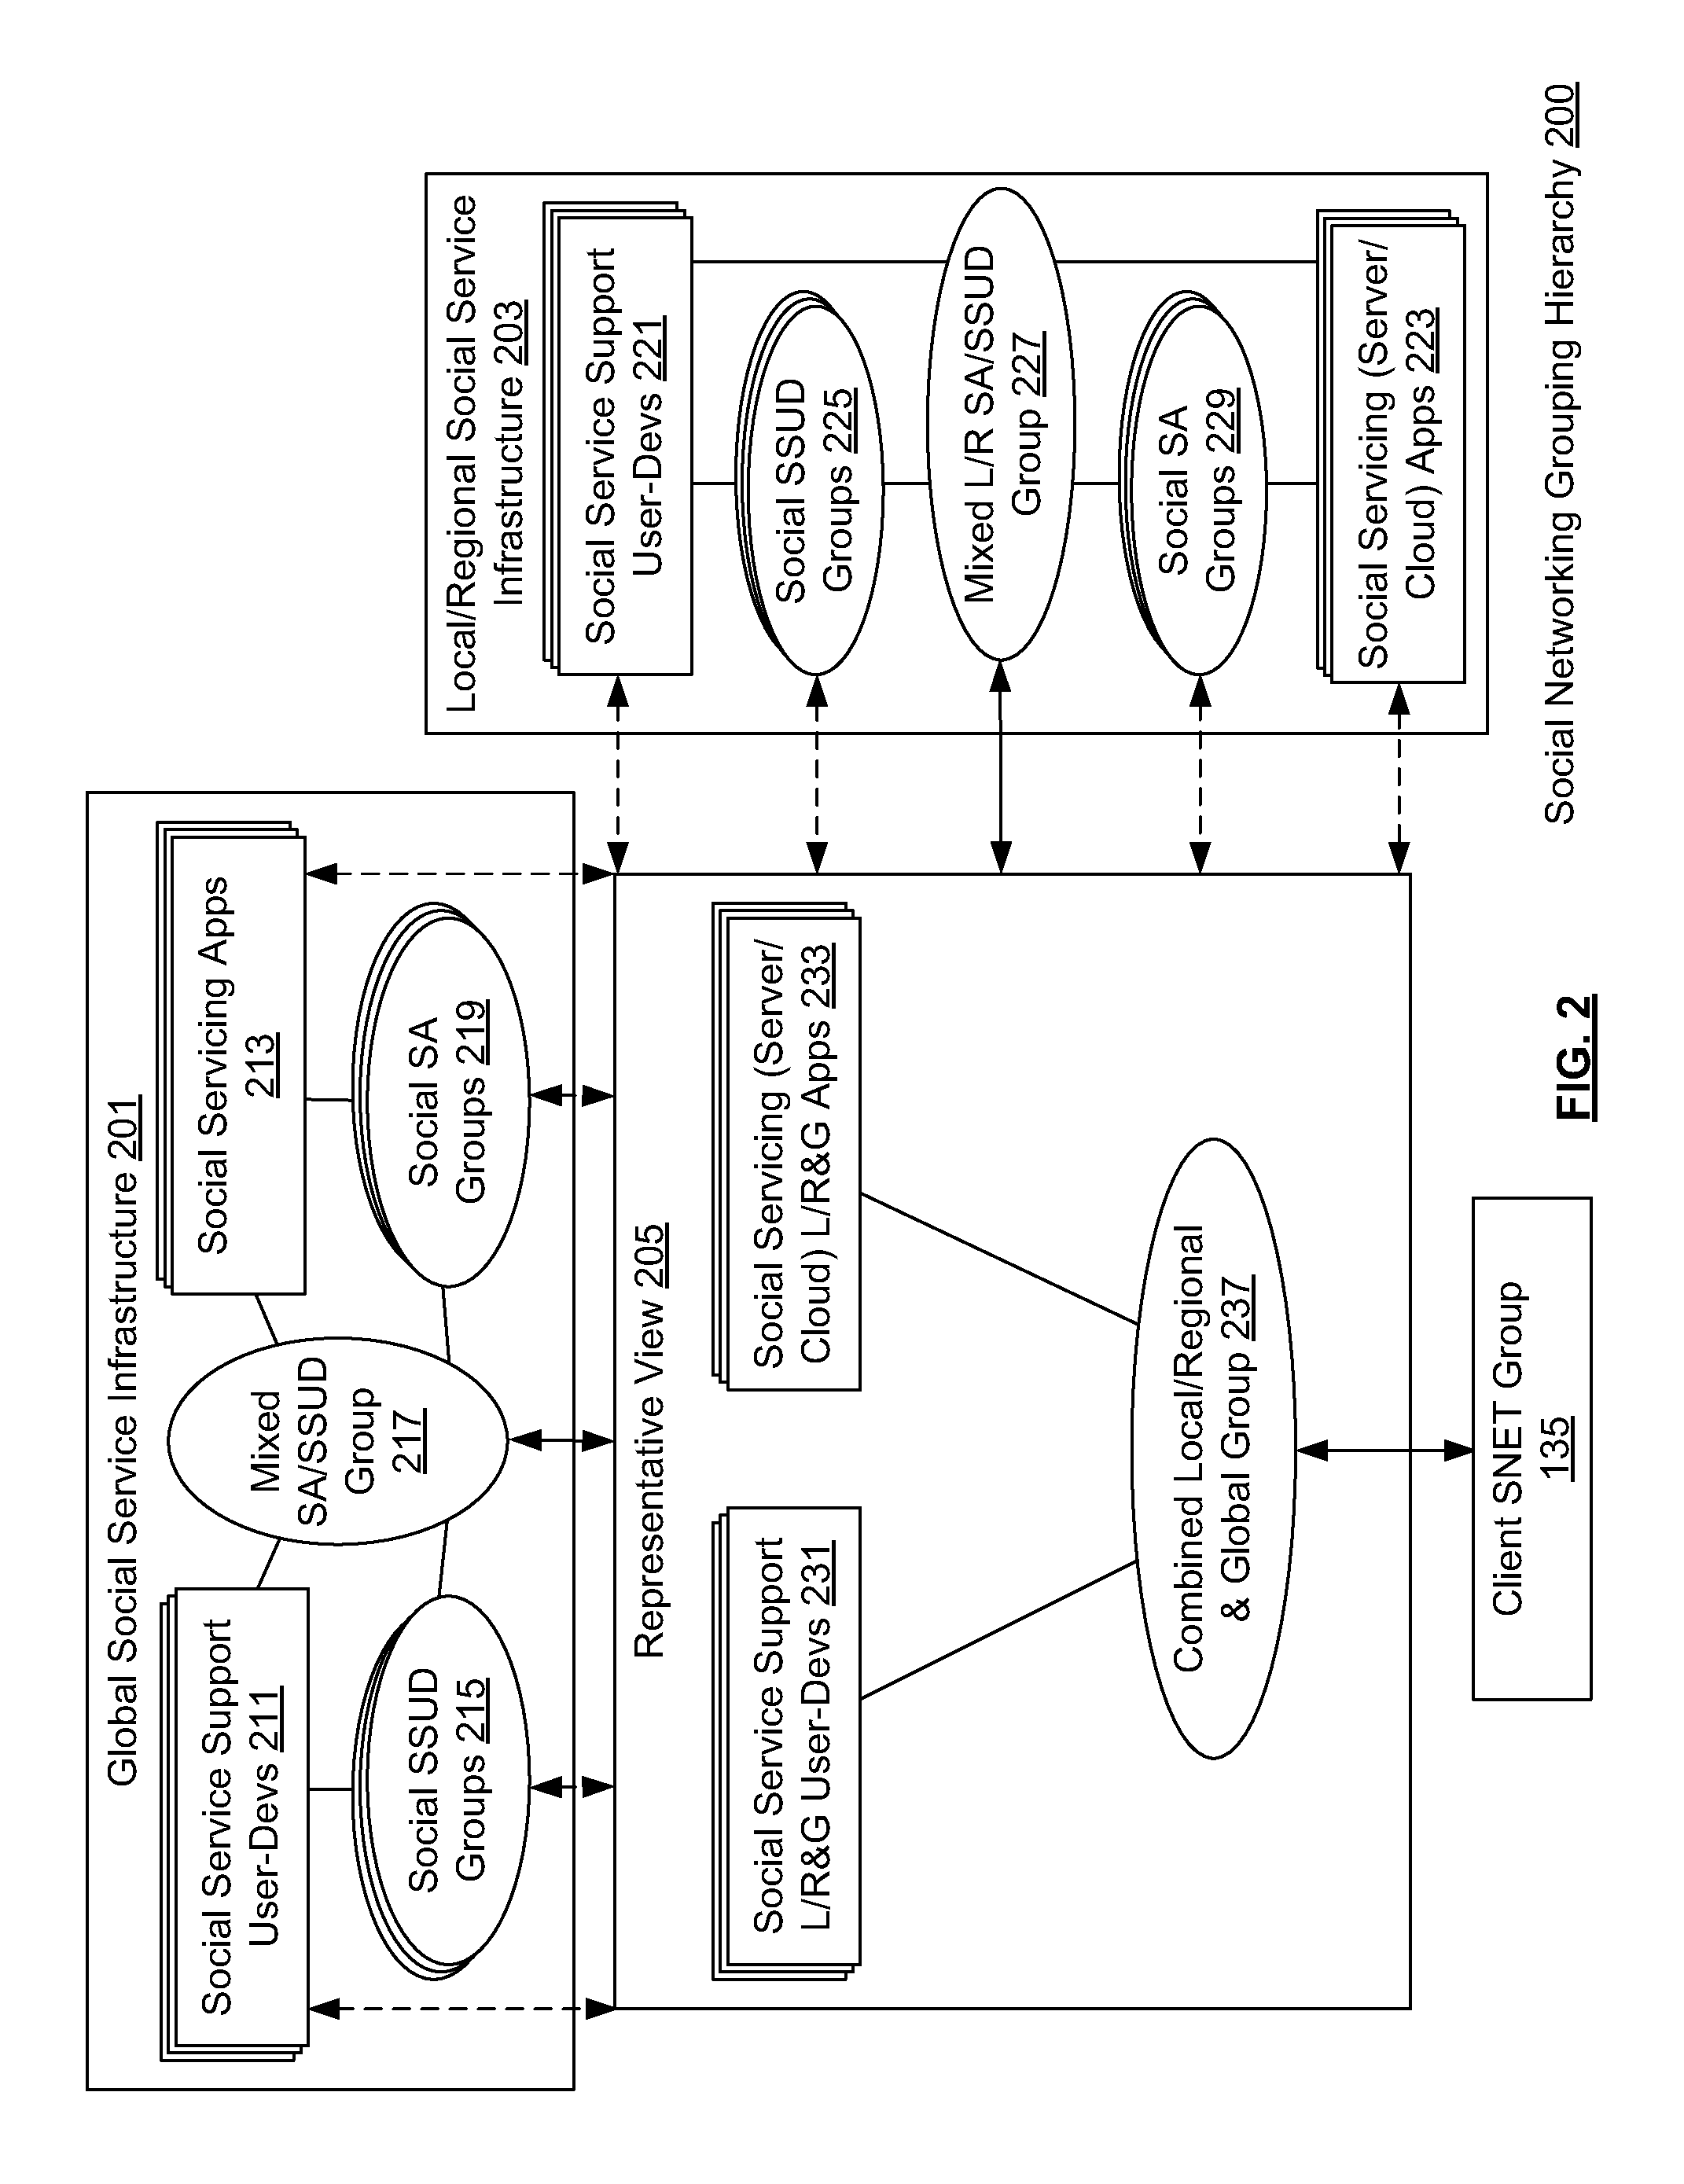 Management of social device interaction with social network infrastructure